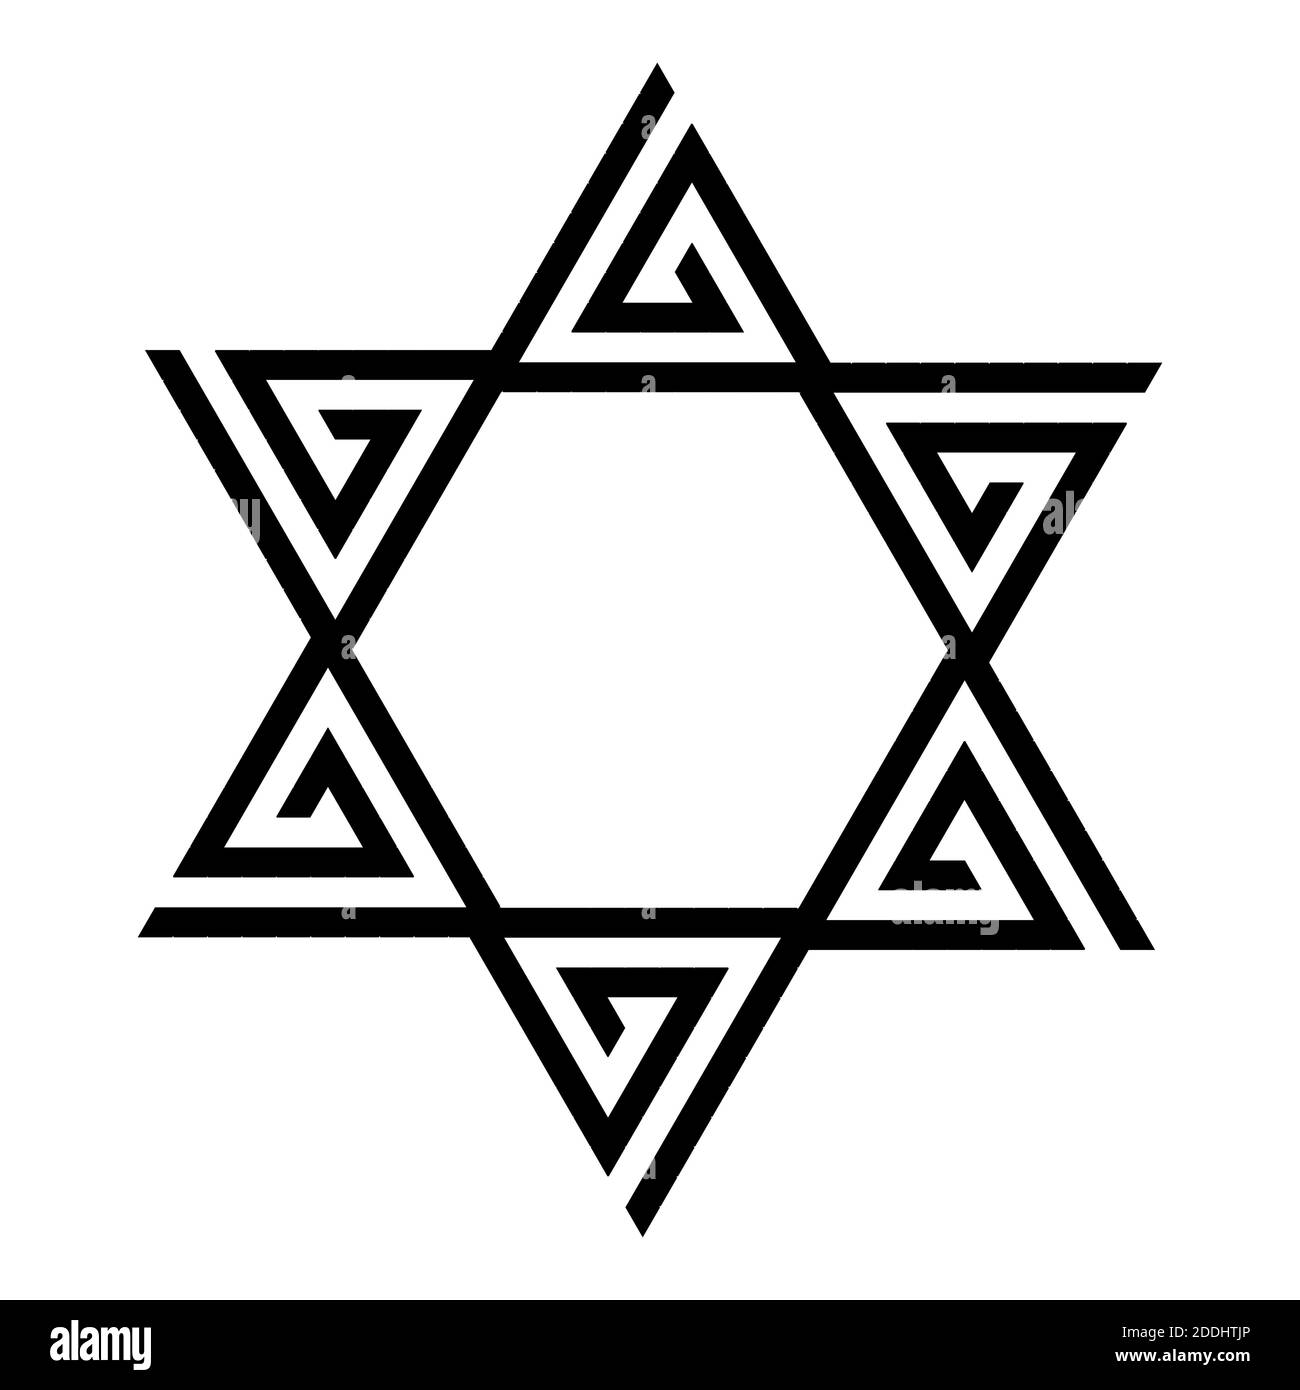 Star of David icon. Israeli Jewish symbol in tribal style. Black vector illustration isolated on white background. Stock Vector